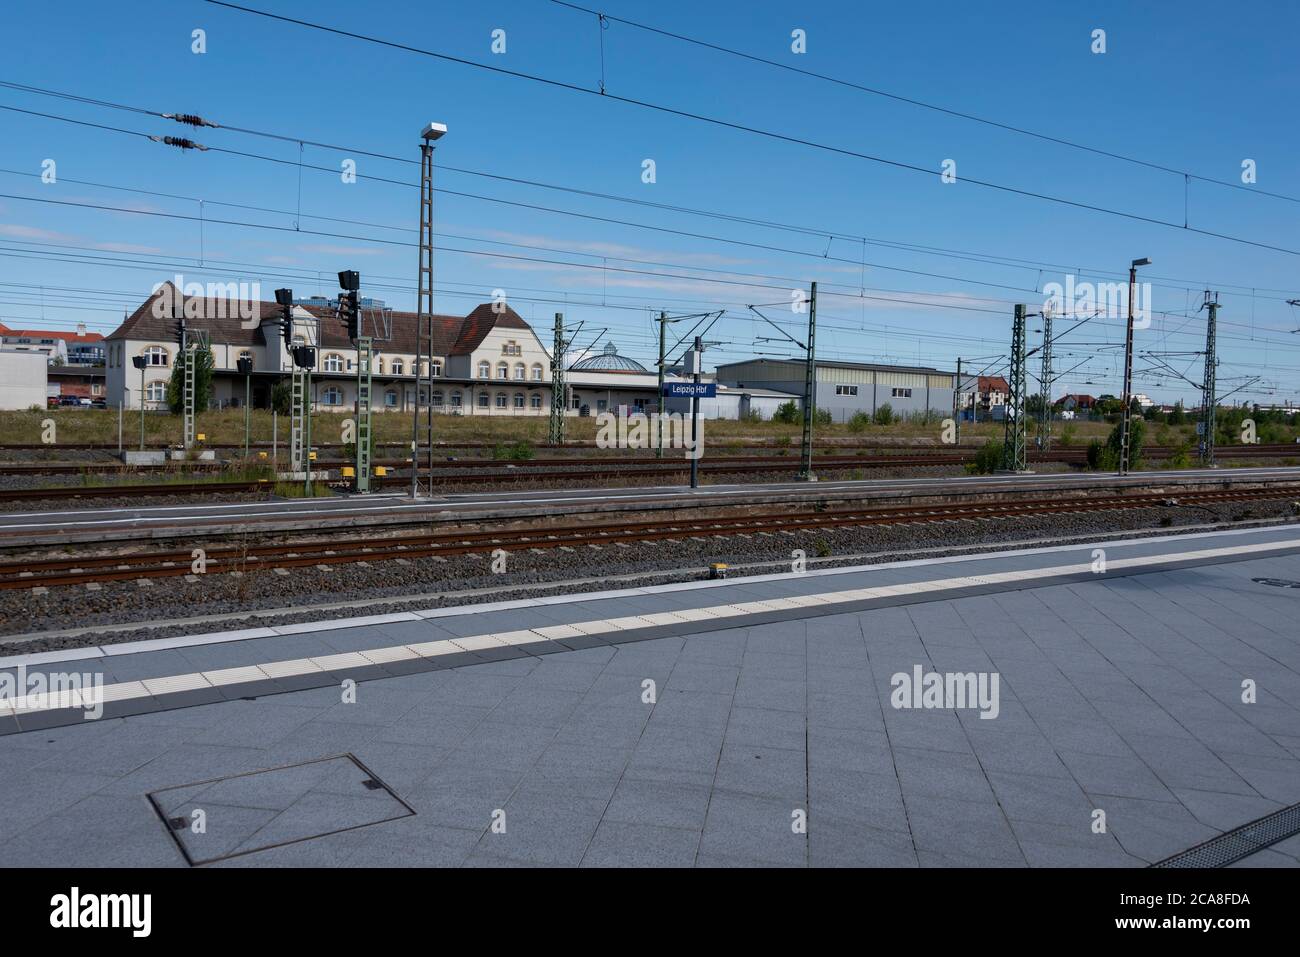 Leipzig, Germany. 29th July, 2020. The dome of the Gasometer Nord can be seen from the tracks of the main station. The round brick building from the Gründerzeit was built in 1890 and is a technical monument today. Credit: Stephan Schulz/dpa-Zentralbild/ZB/dpa/Alamy Live News Stock Photo